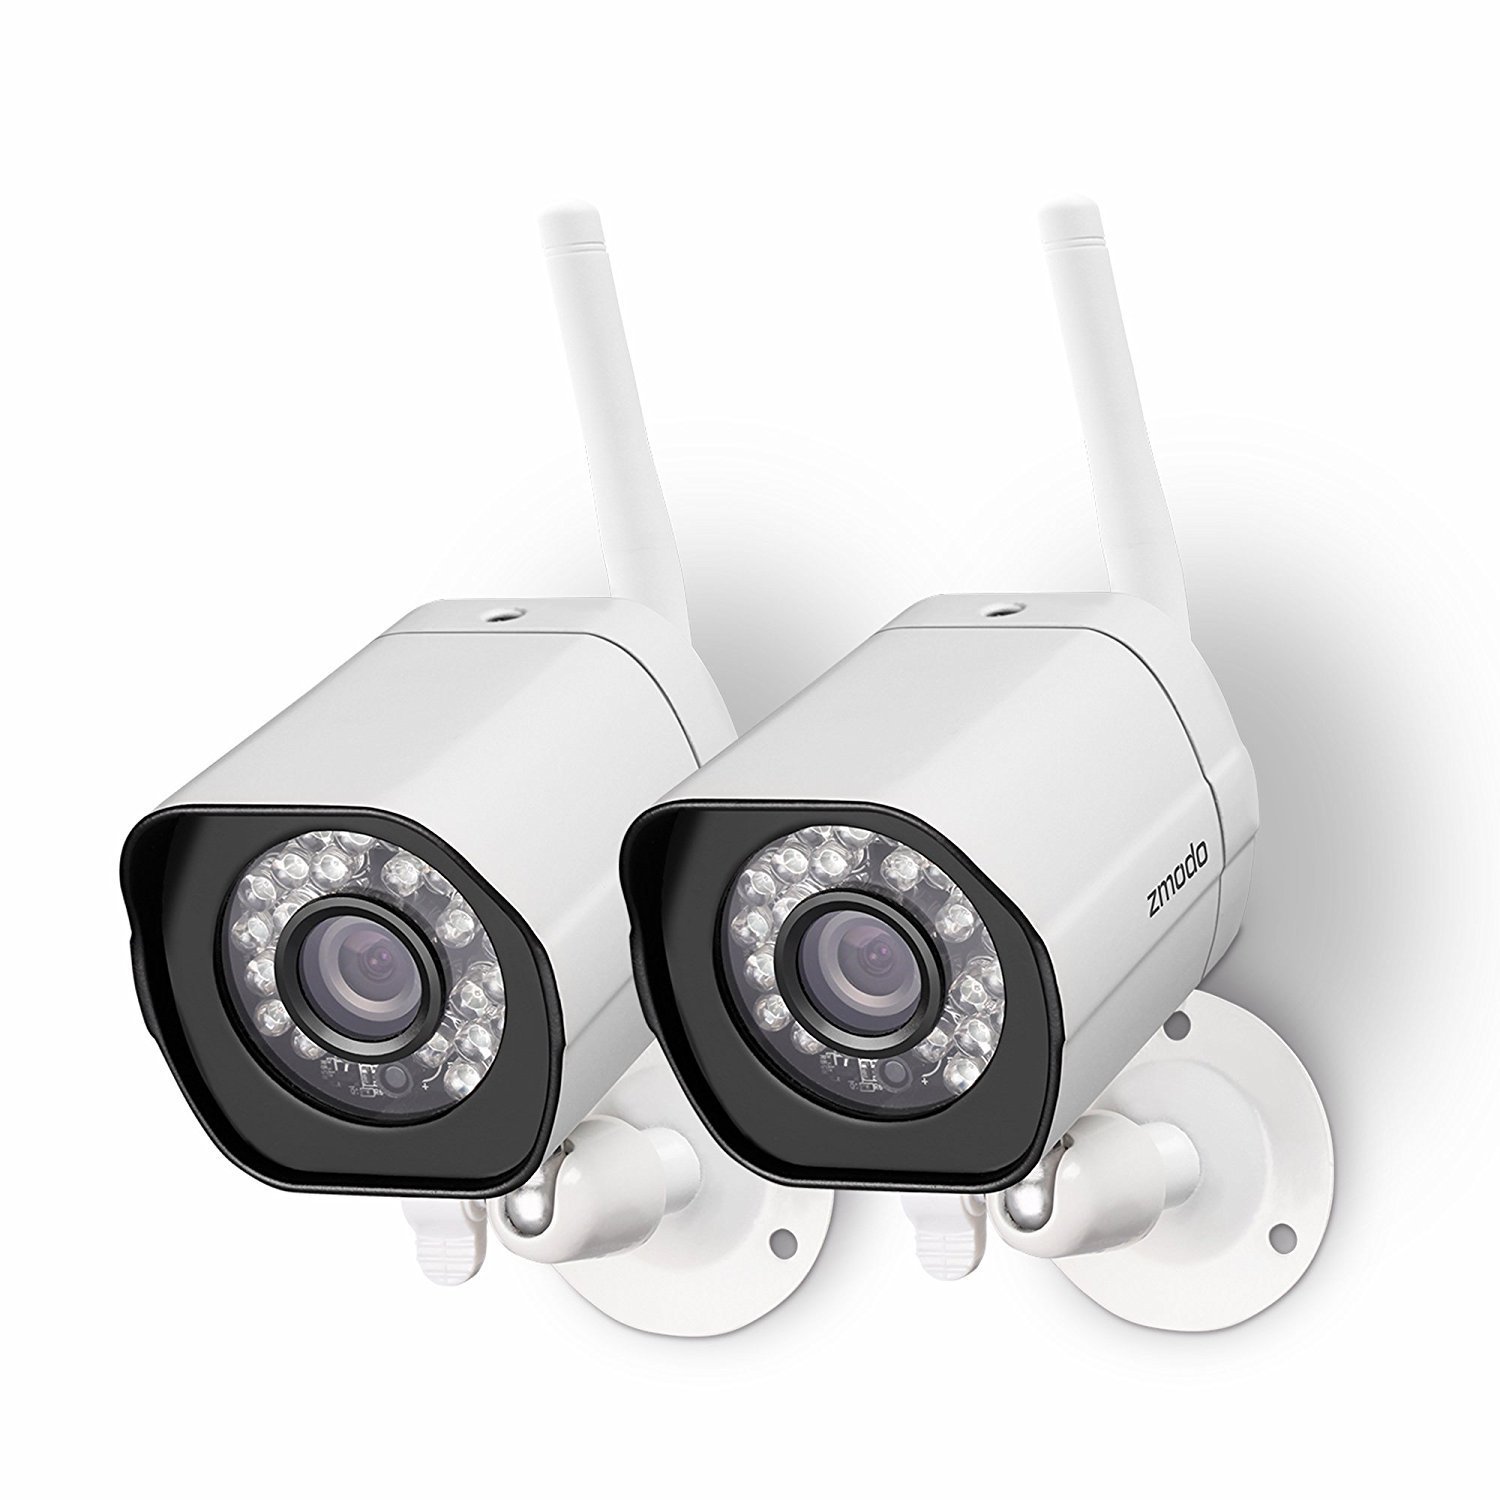 Zmodo Wireless Security Camera System 2 Pack Smart Hd Outdoor Wifi Ip 